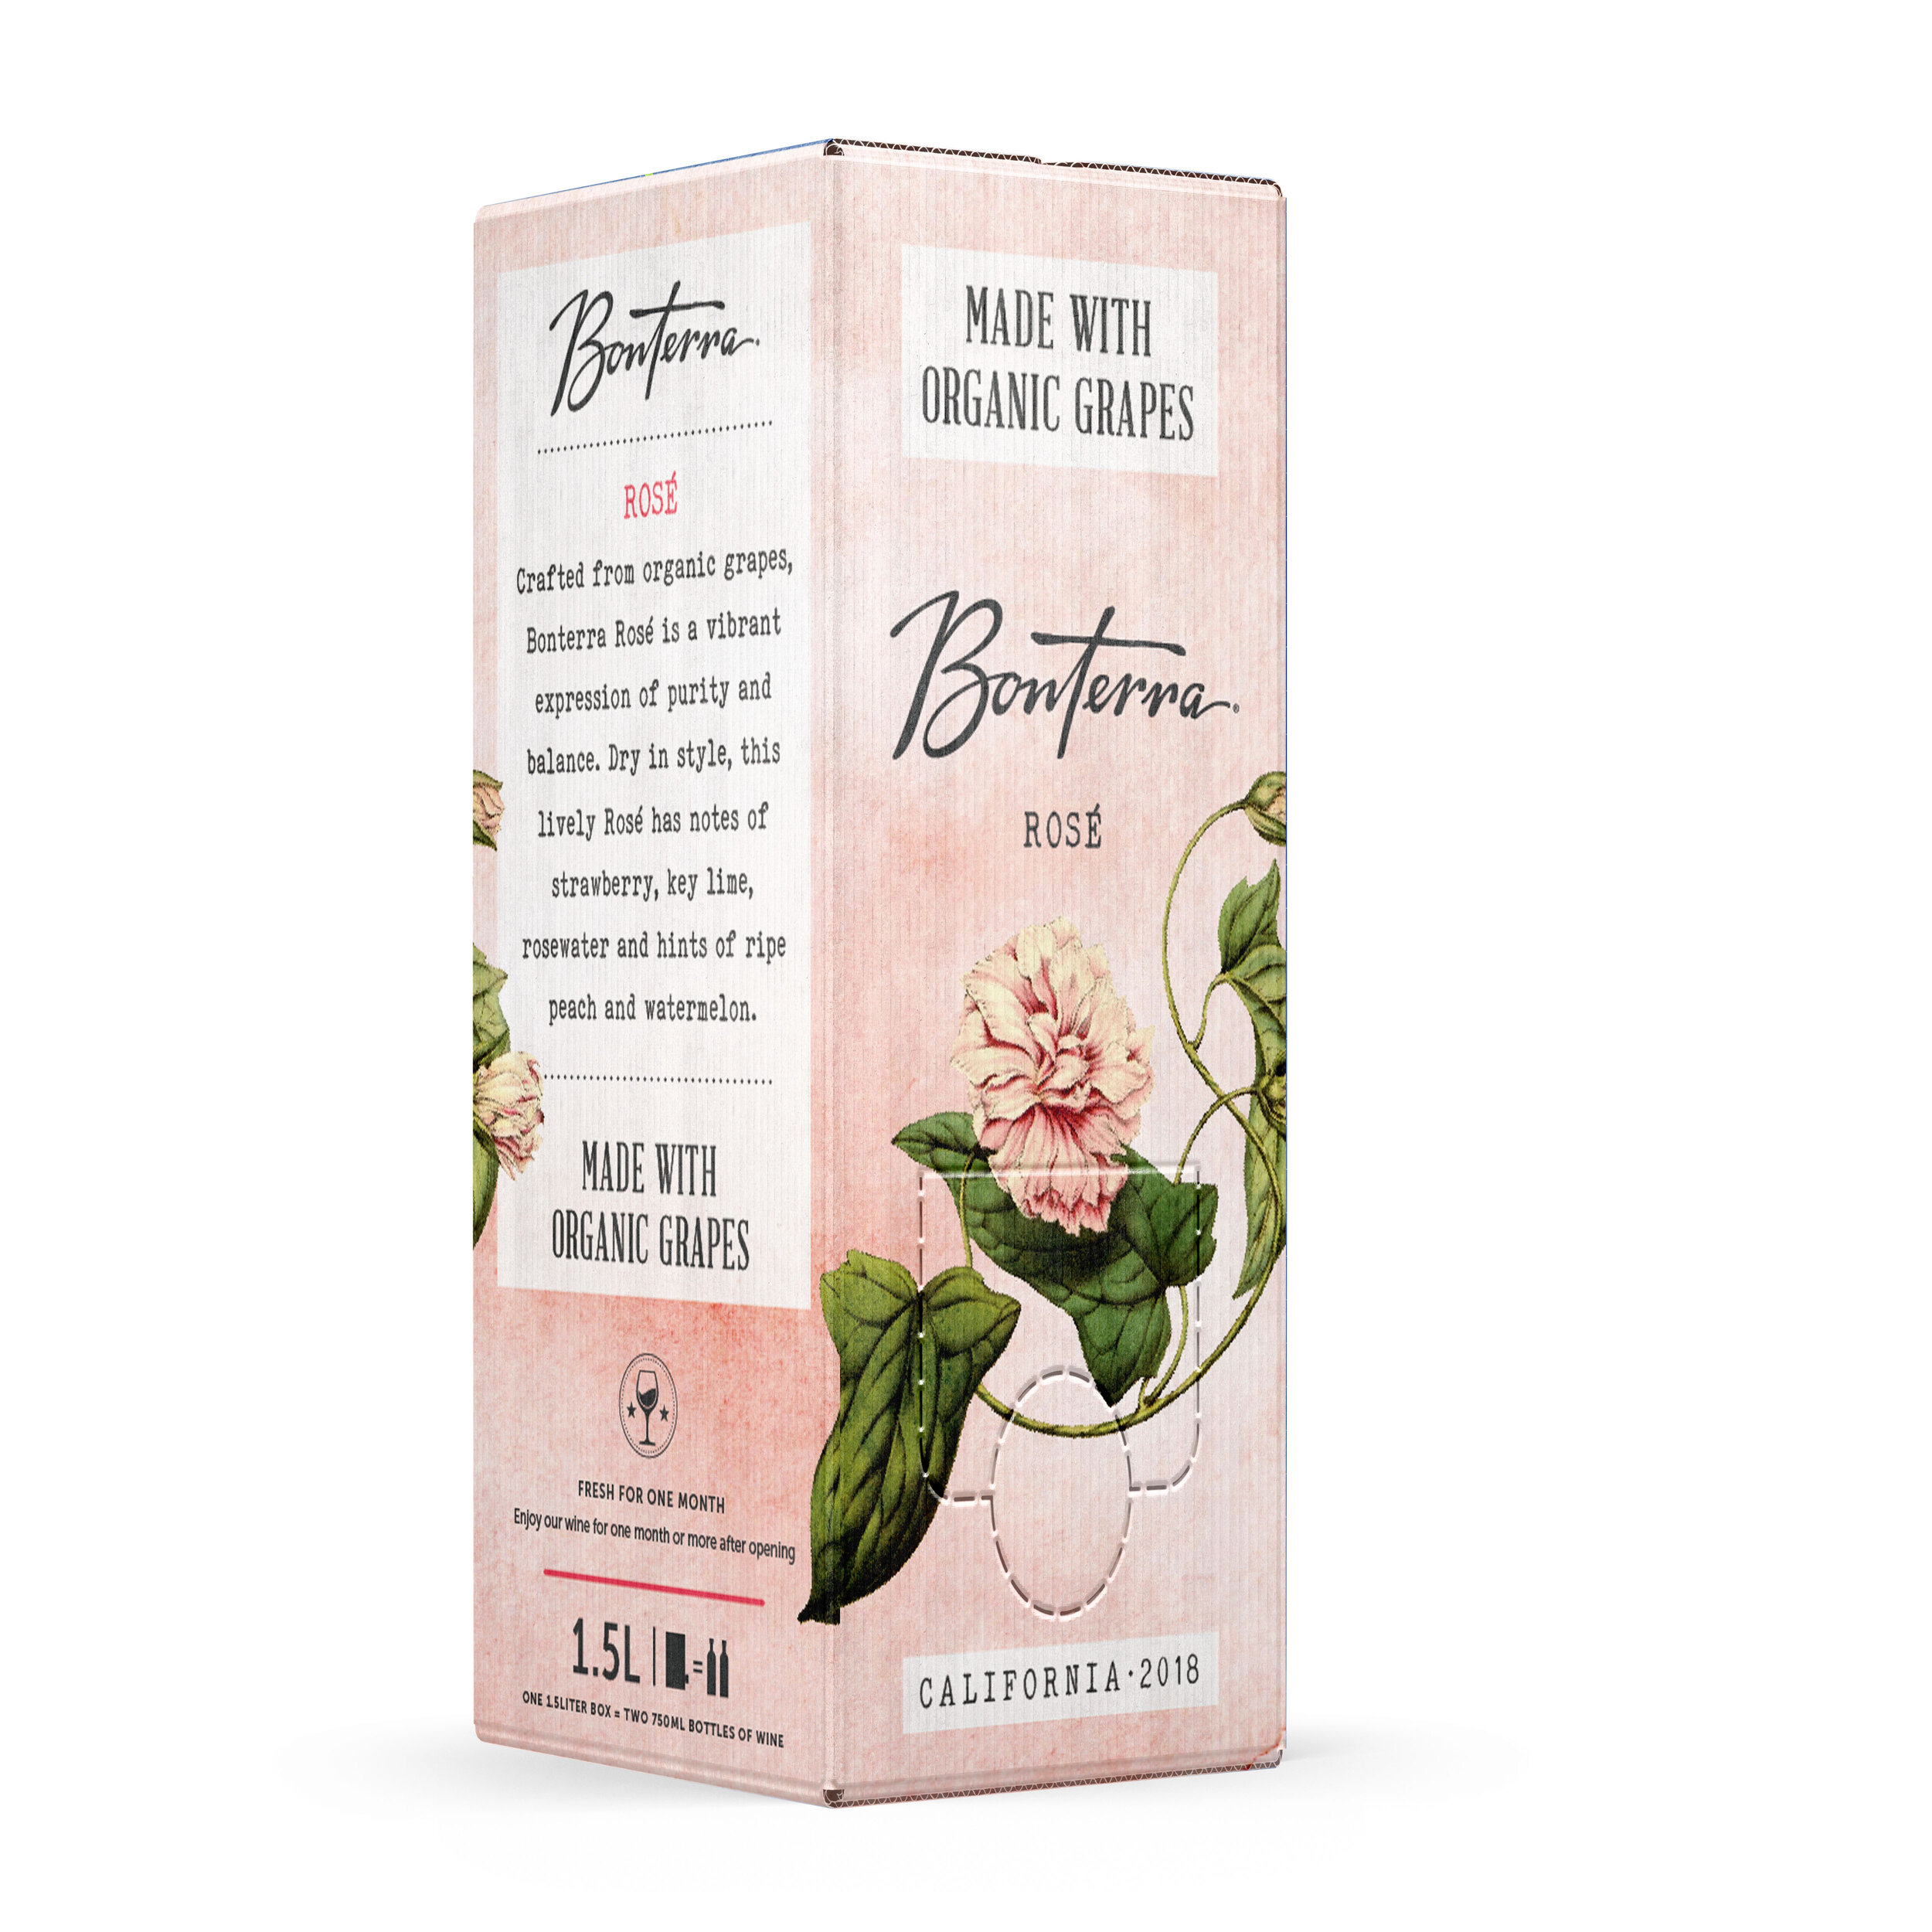   Bonterra Rosé Boxed Wine     Bonterra’s boxed Rosé delivers the purity of flavor of Bonterra’s organically farmed wine in a convenient, eco-friendly 1.5-liter format. Good for up to 30 days after opening, the wine can be enjoyed throughout the whol